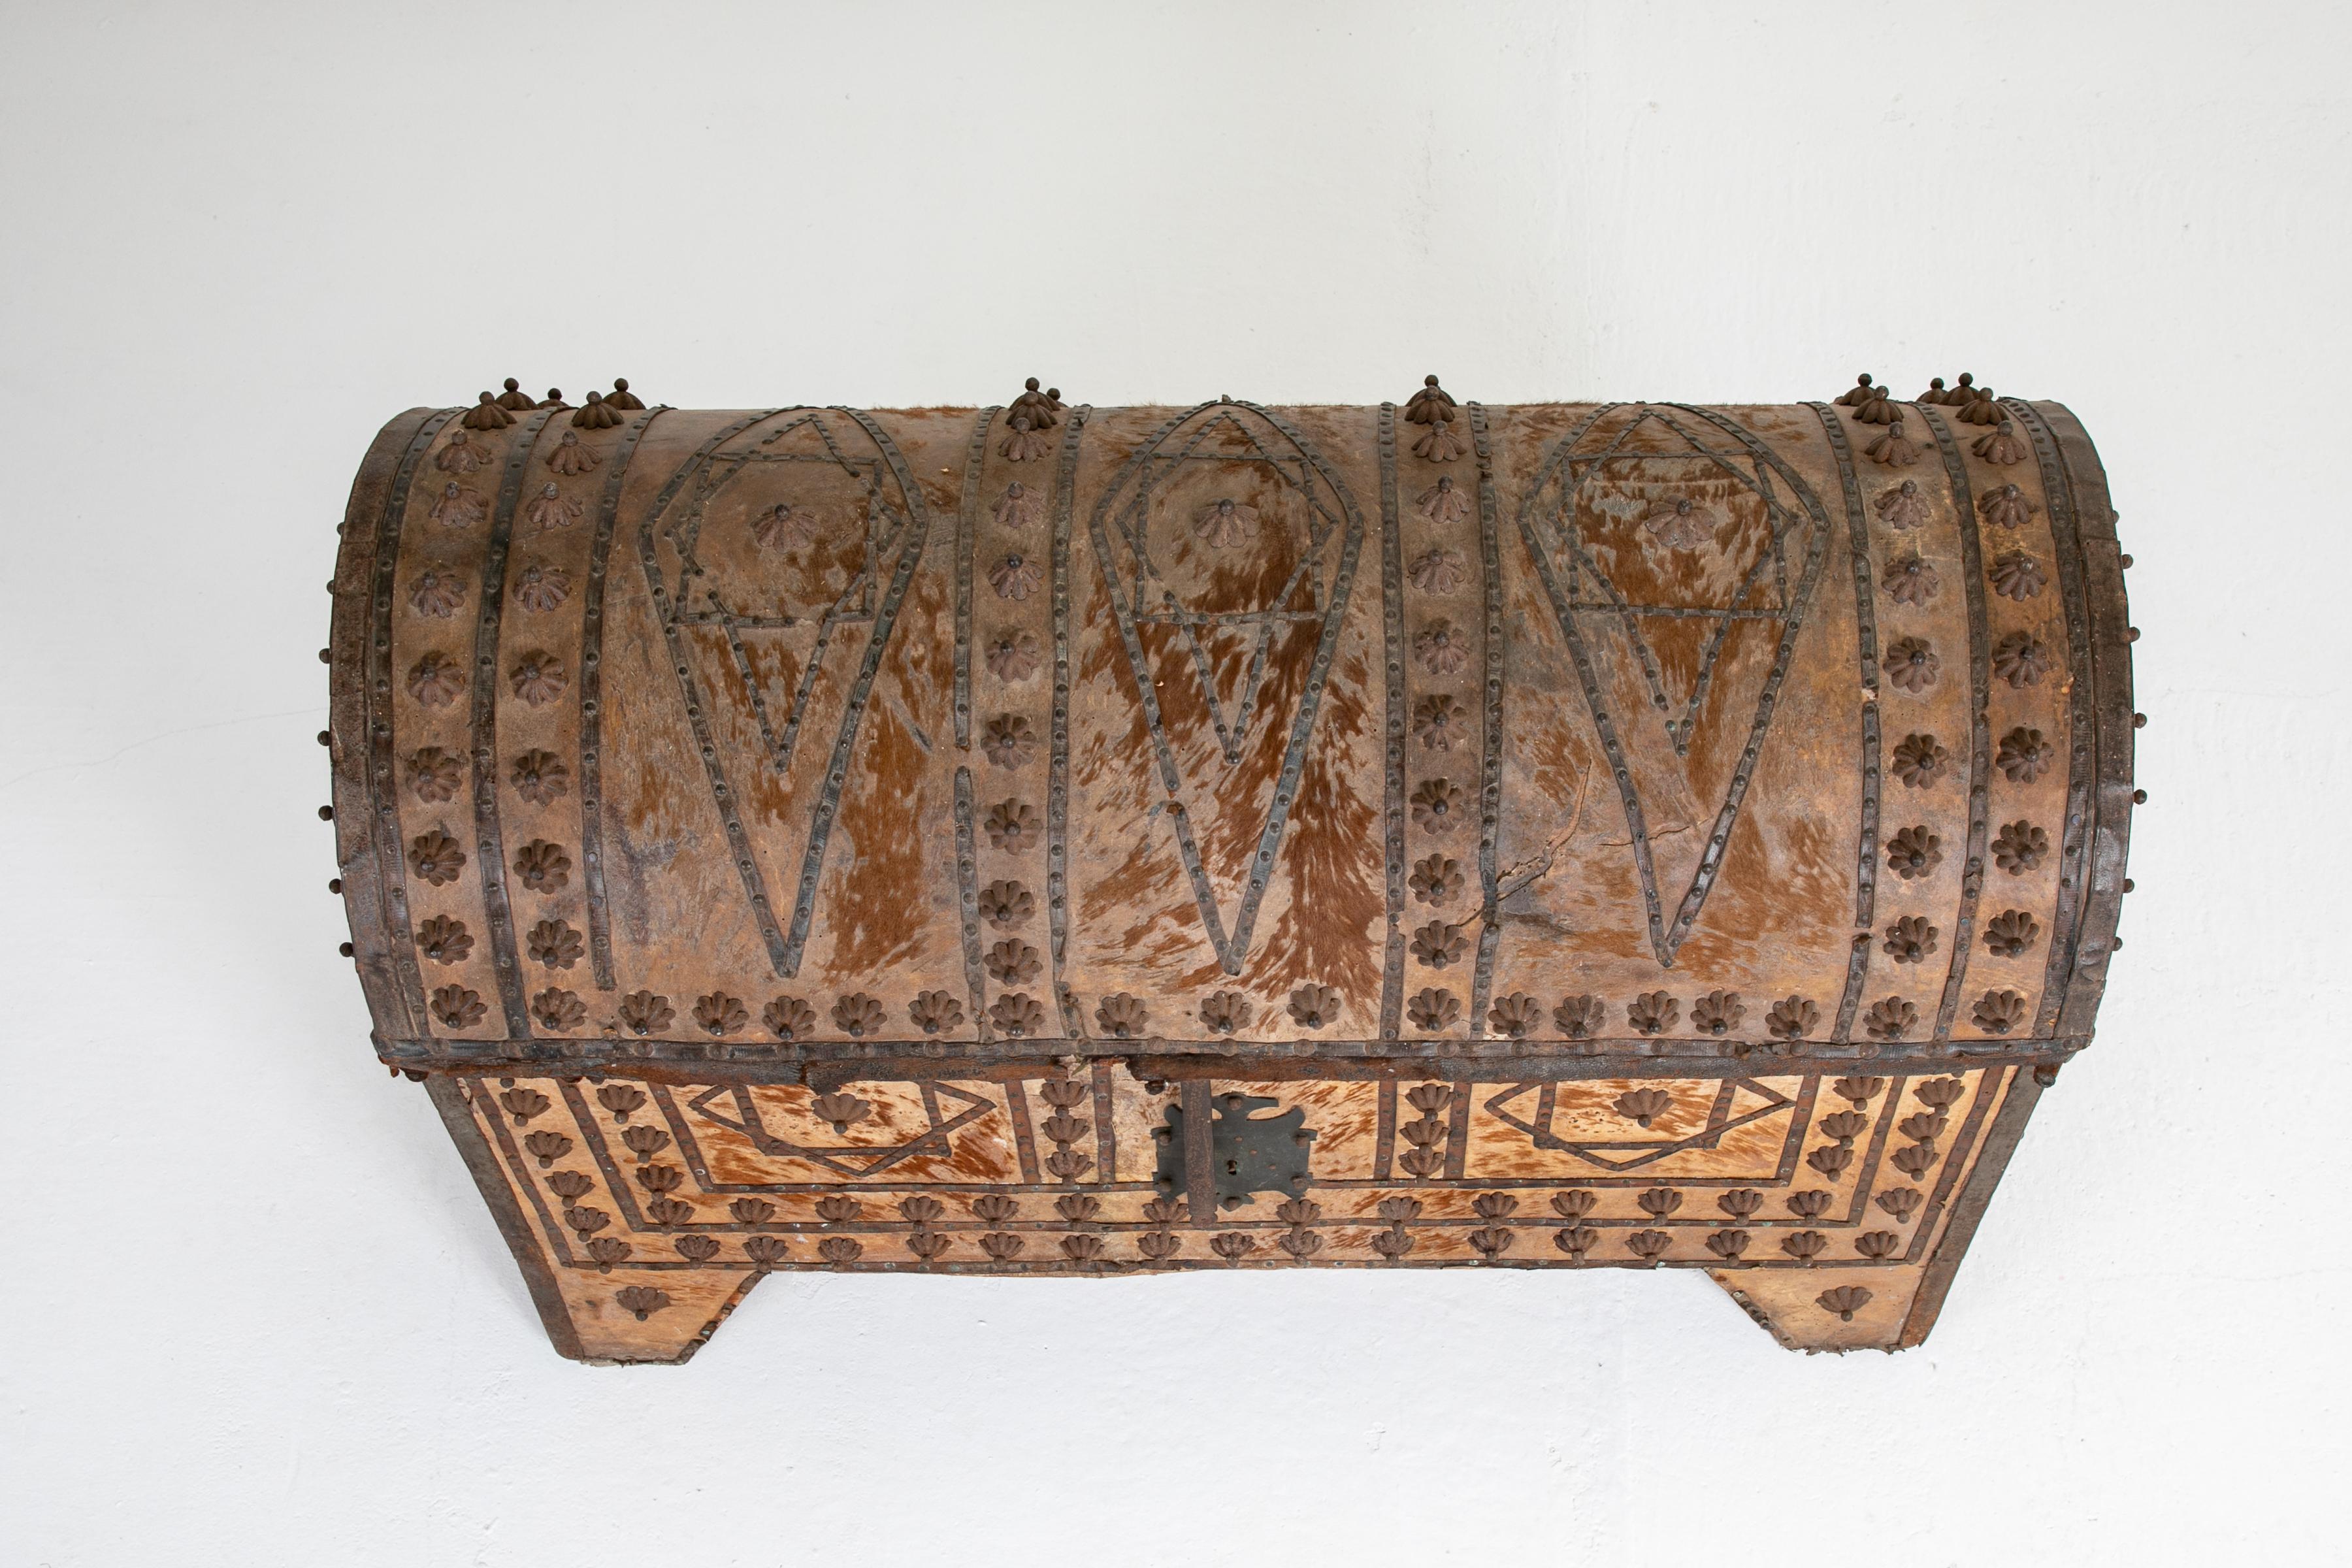 A large rectangular shaped, 19th Century Spanish leather trunk with a domed top. Having its original studded decoration that is worked to create the patterns. The nail heads are raised and shaped as flowers adding interest and a nice contrast.